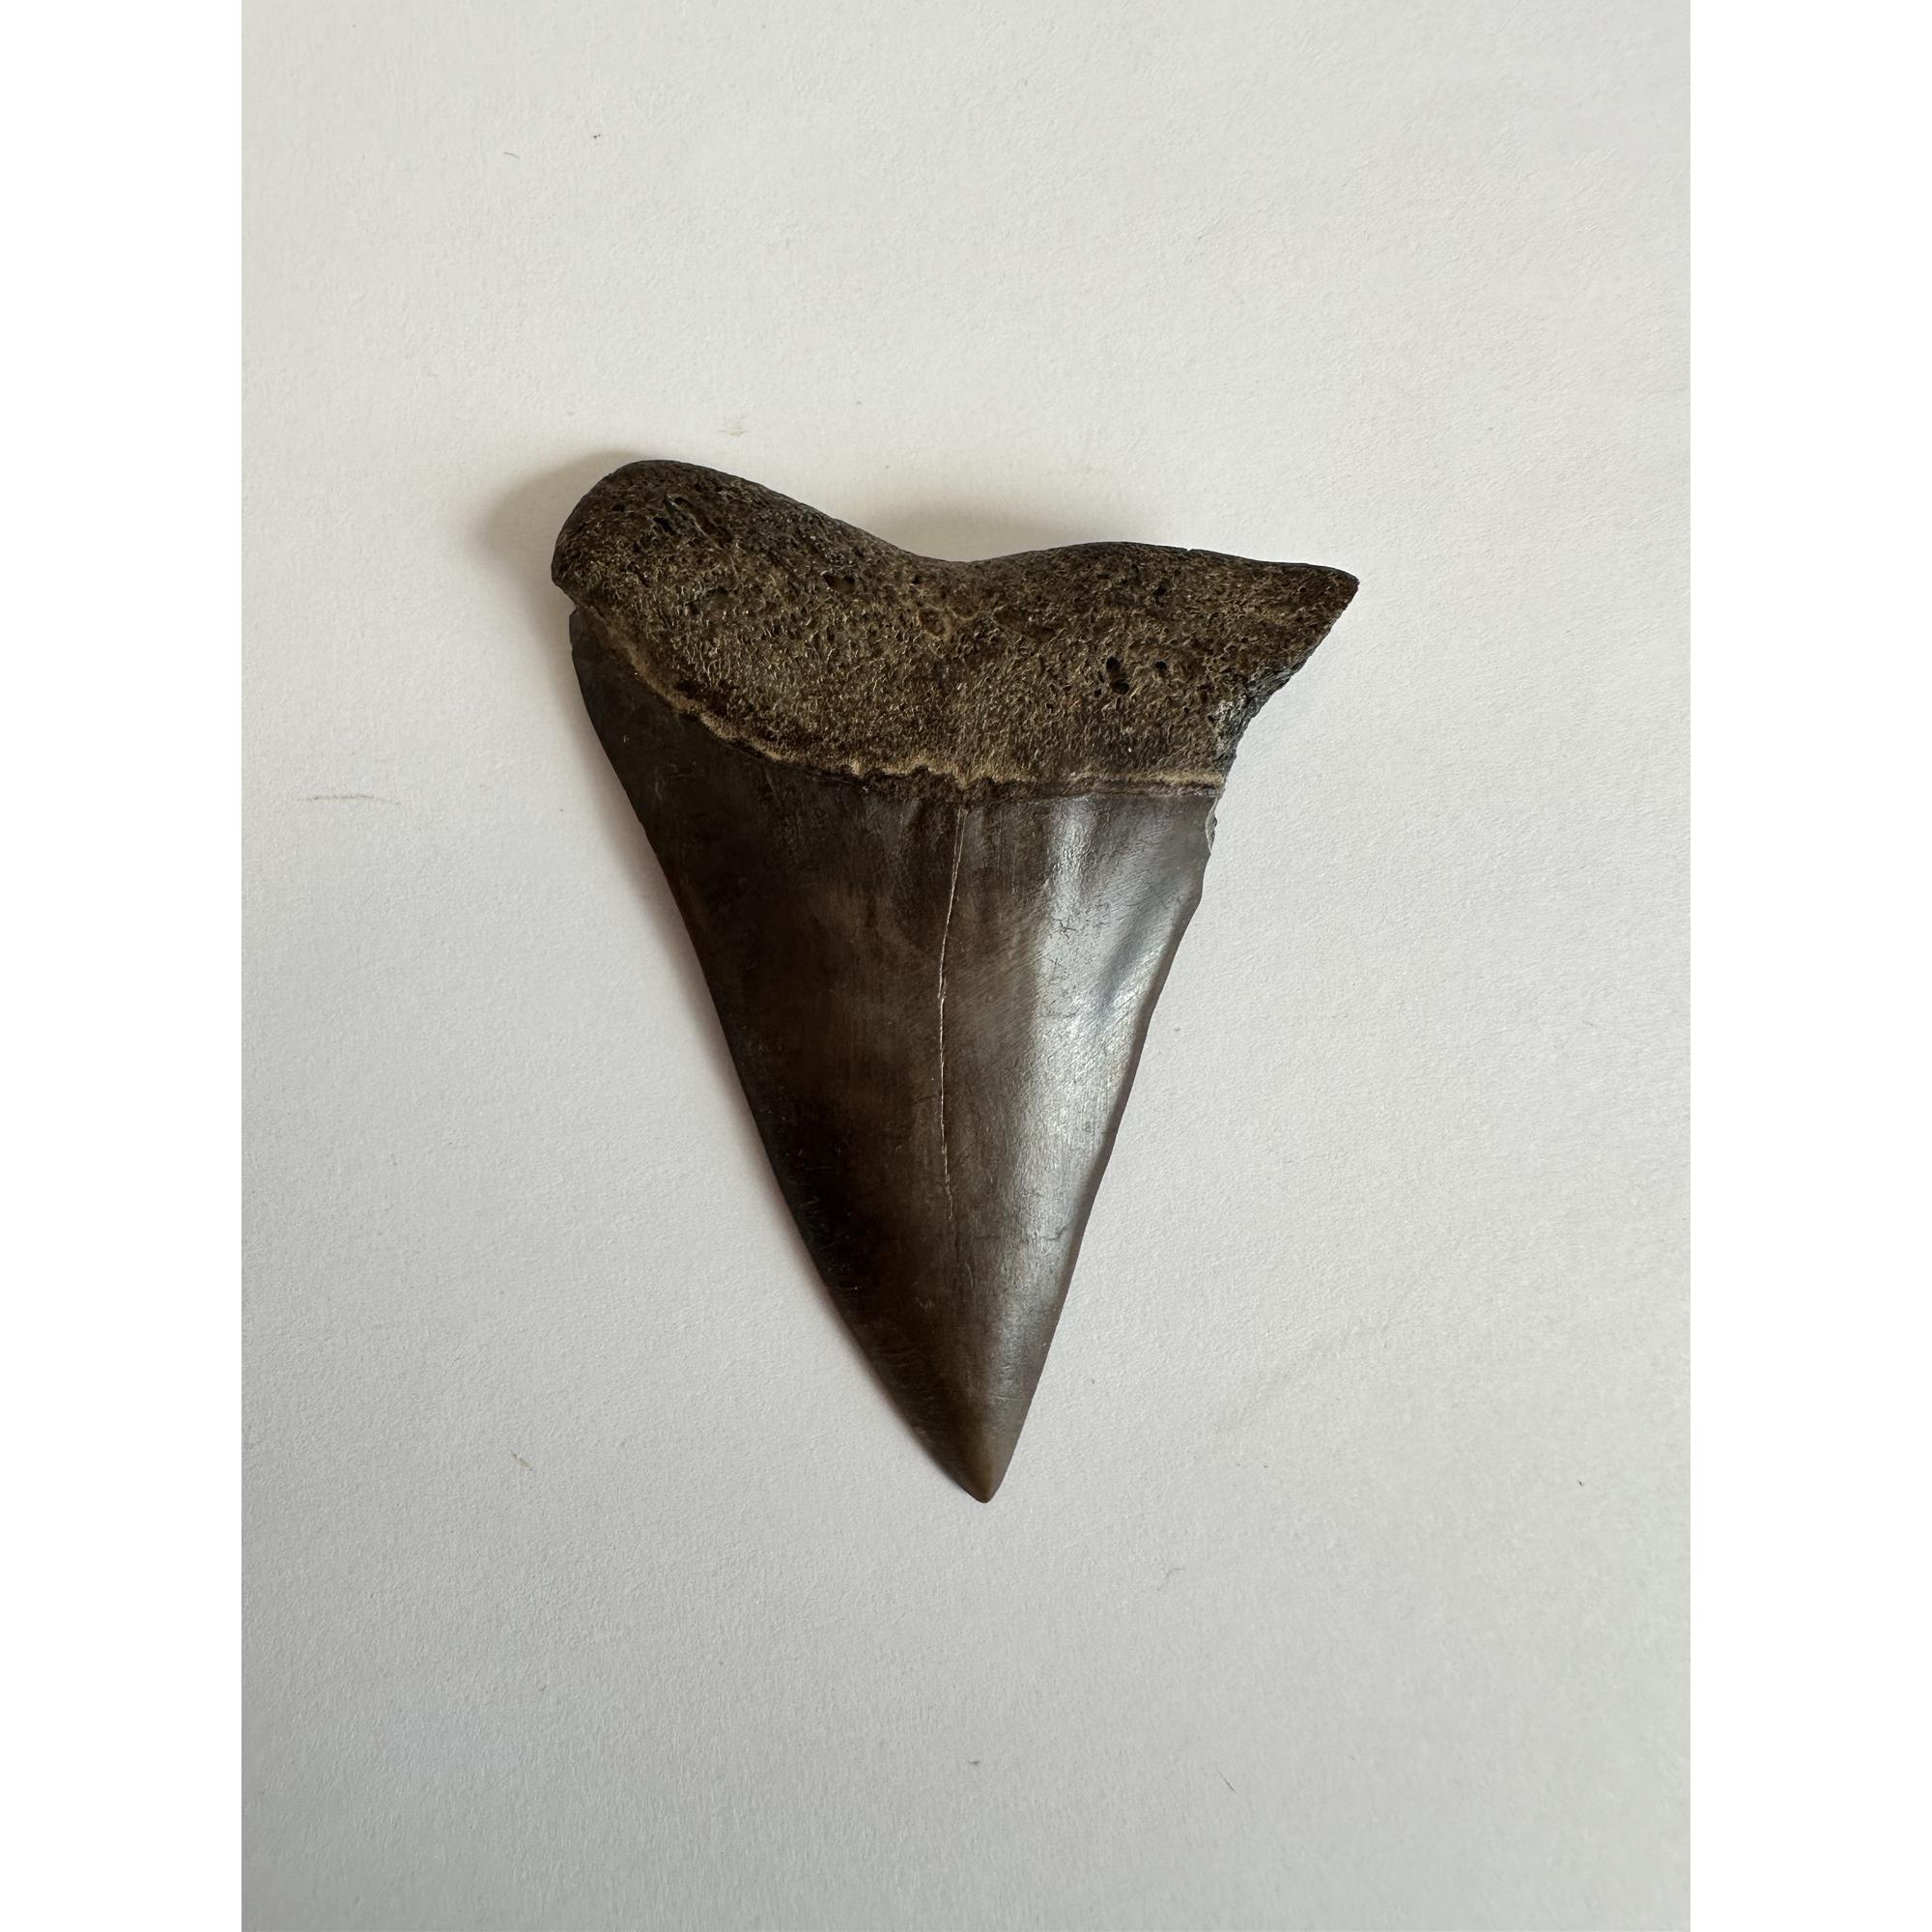 Mako Shark Tooth, 2 3/8 inches Prehistoric Online